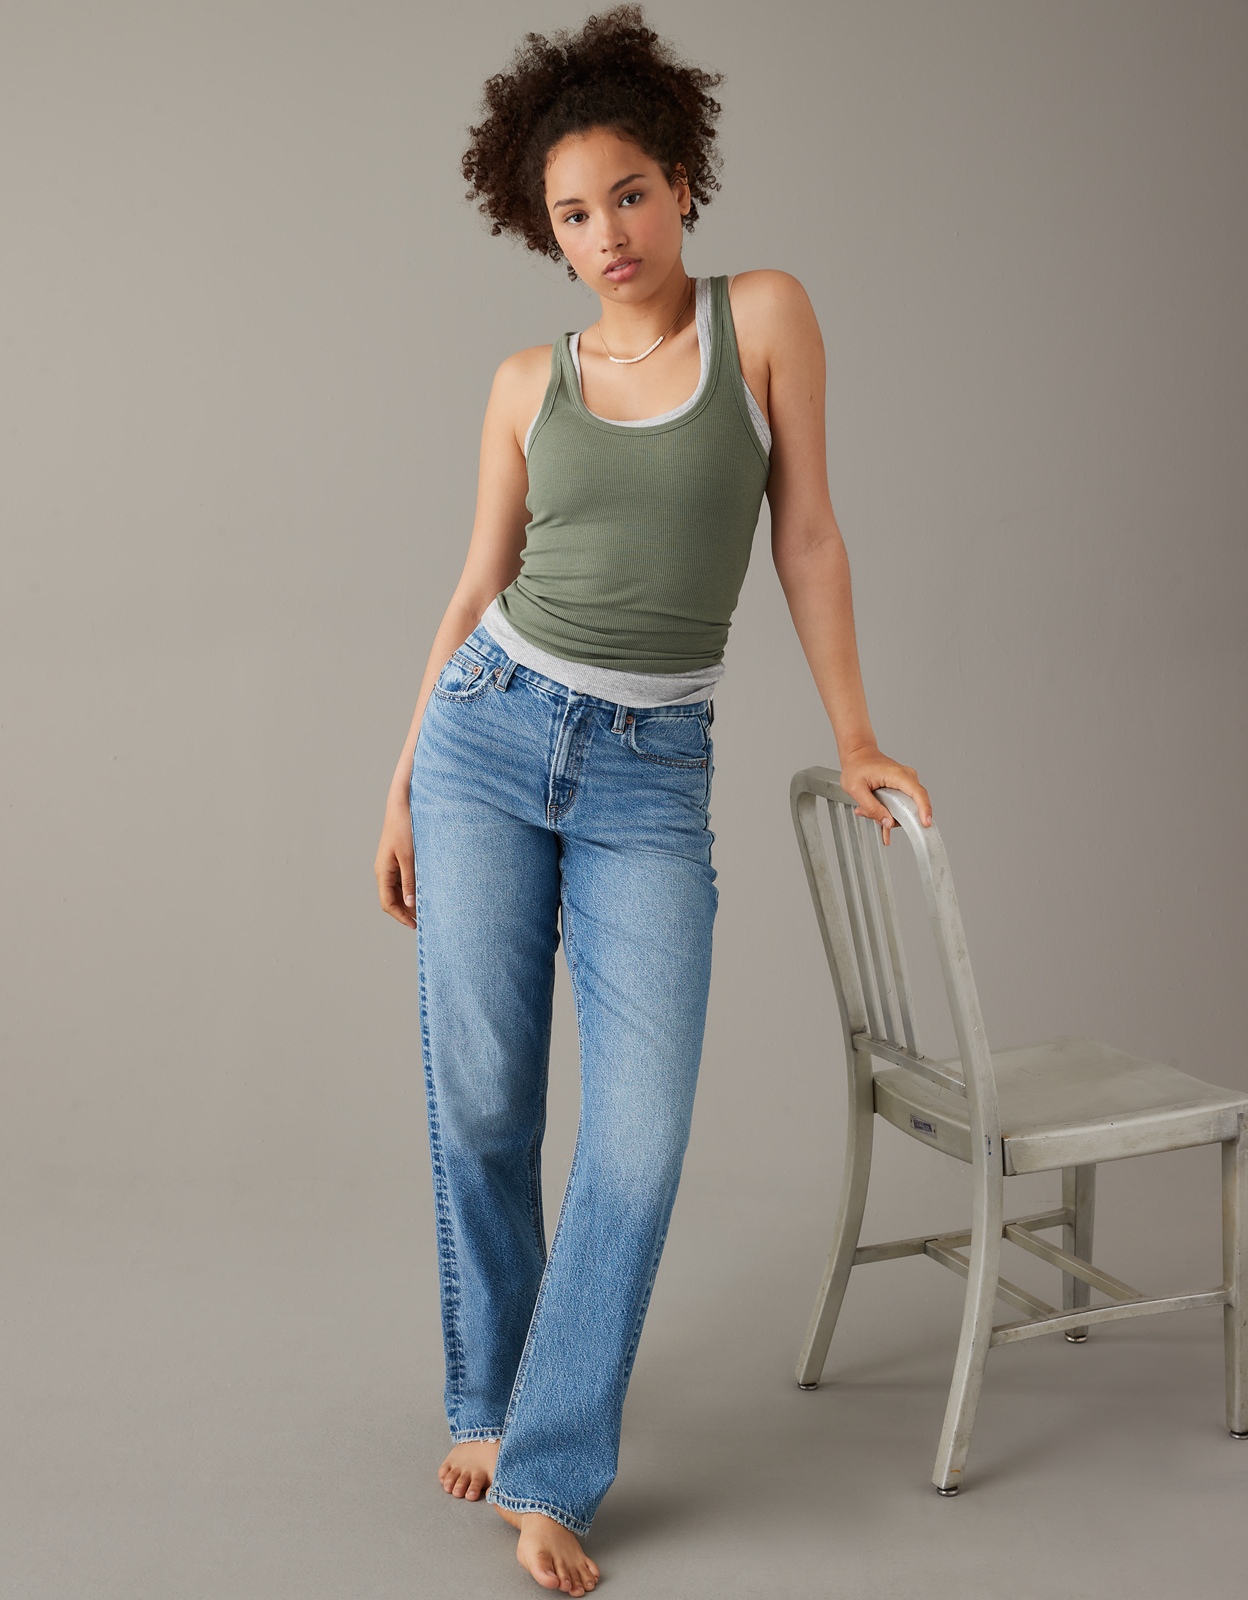 Shop AE Boyfriend Tank Top online | American Eagle Outfitters Egypt